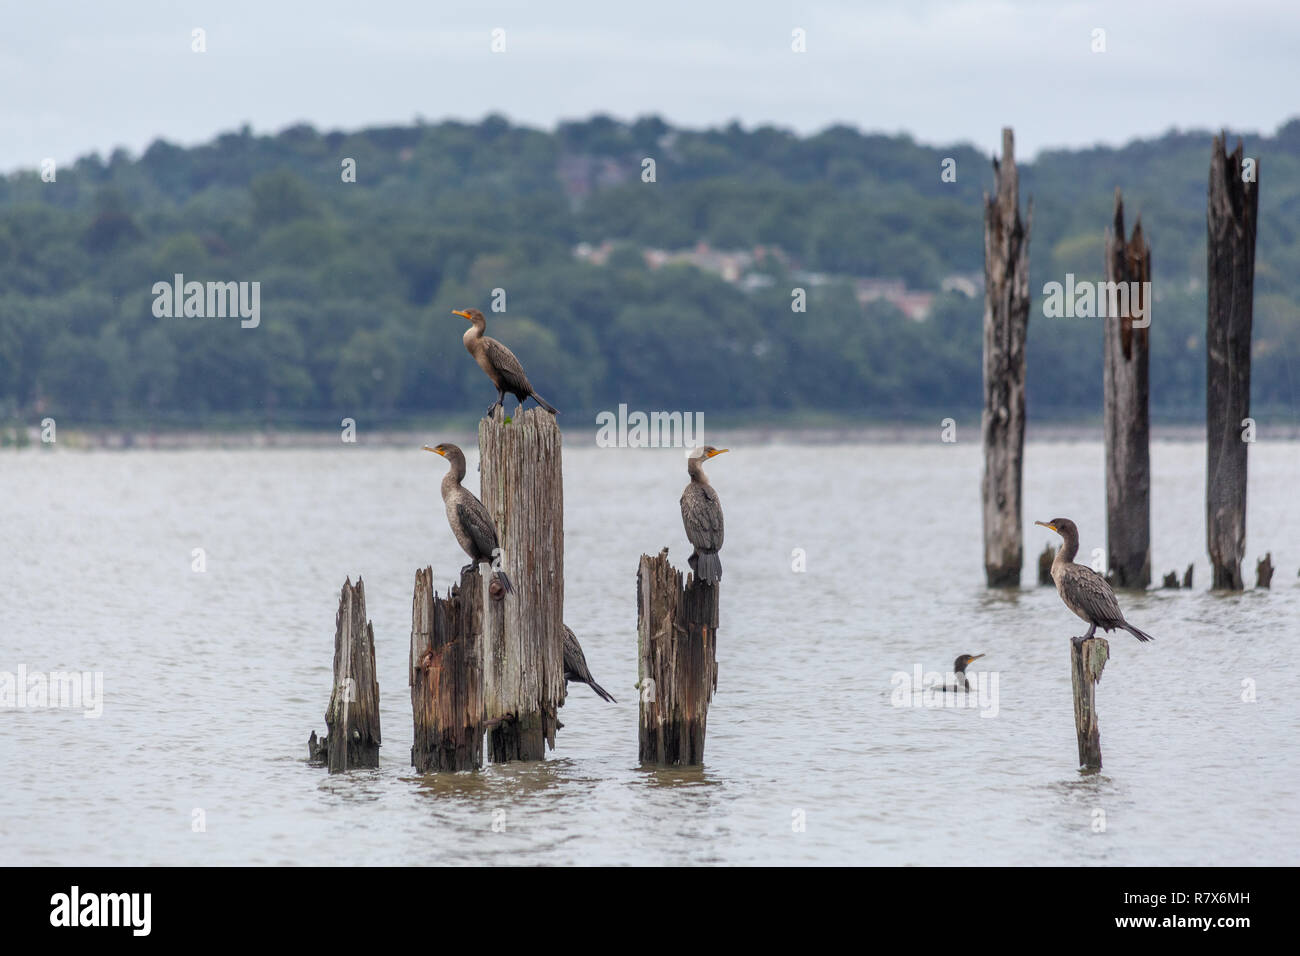 A small rookery of cormorants observing their surroundings perched on old pier logs near the Piermont Pier in the Hudson River. Piermont, New York Stock Photo